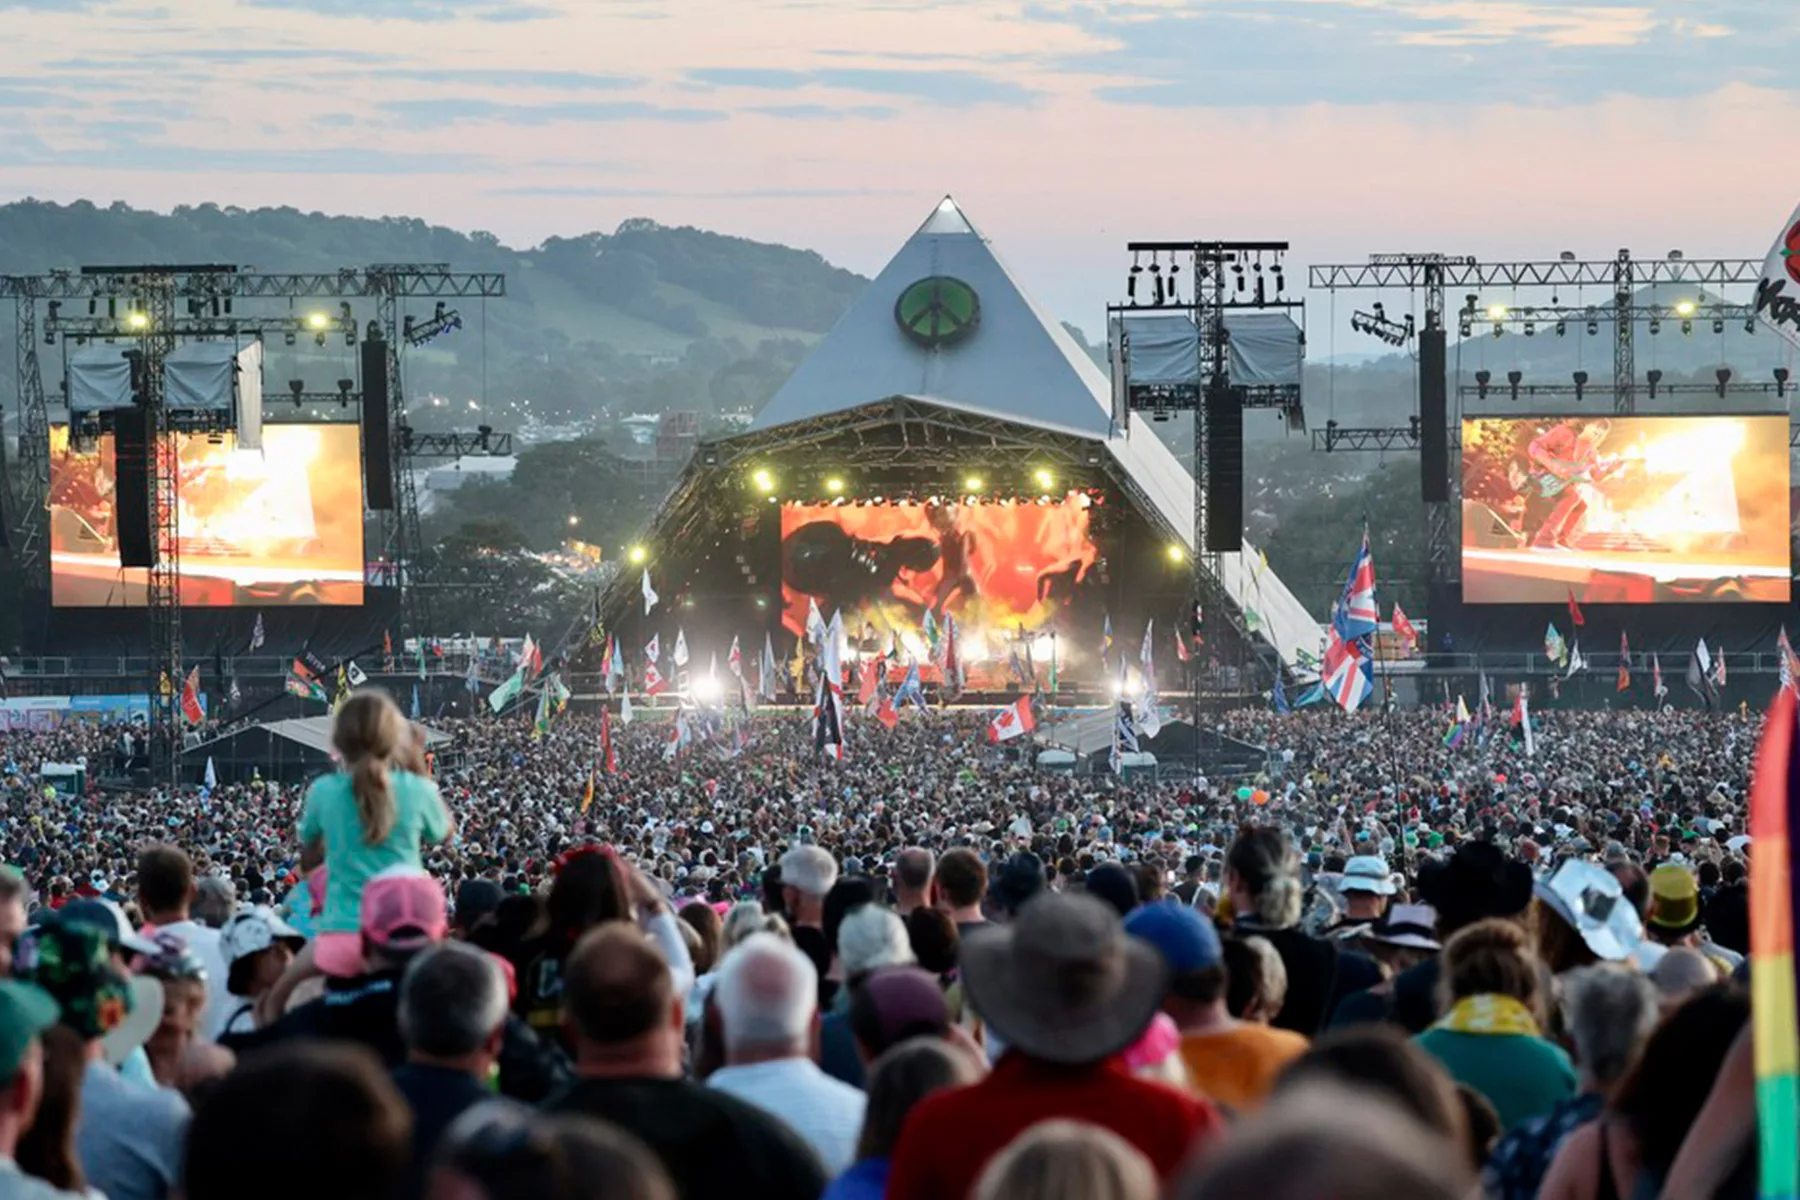 Glastonbury Festival this year’s lineup with LCD Soundsytem, Justice, Peggy Gou, and more